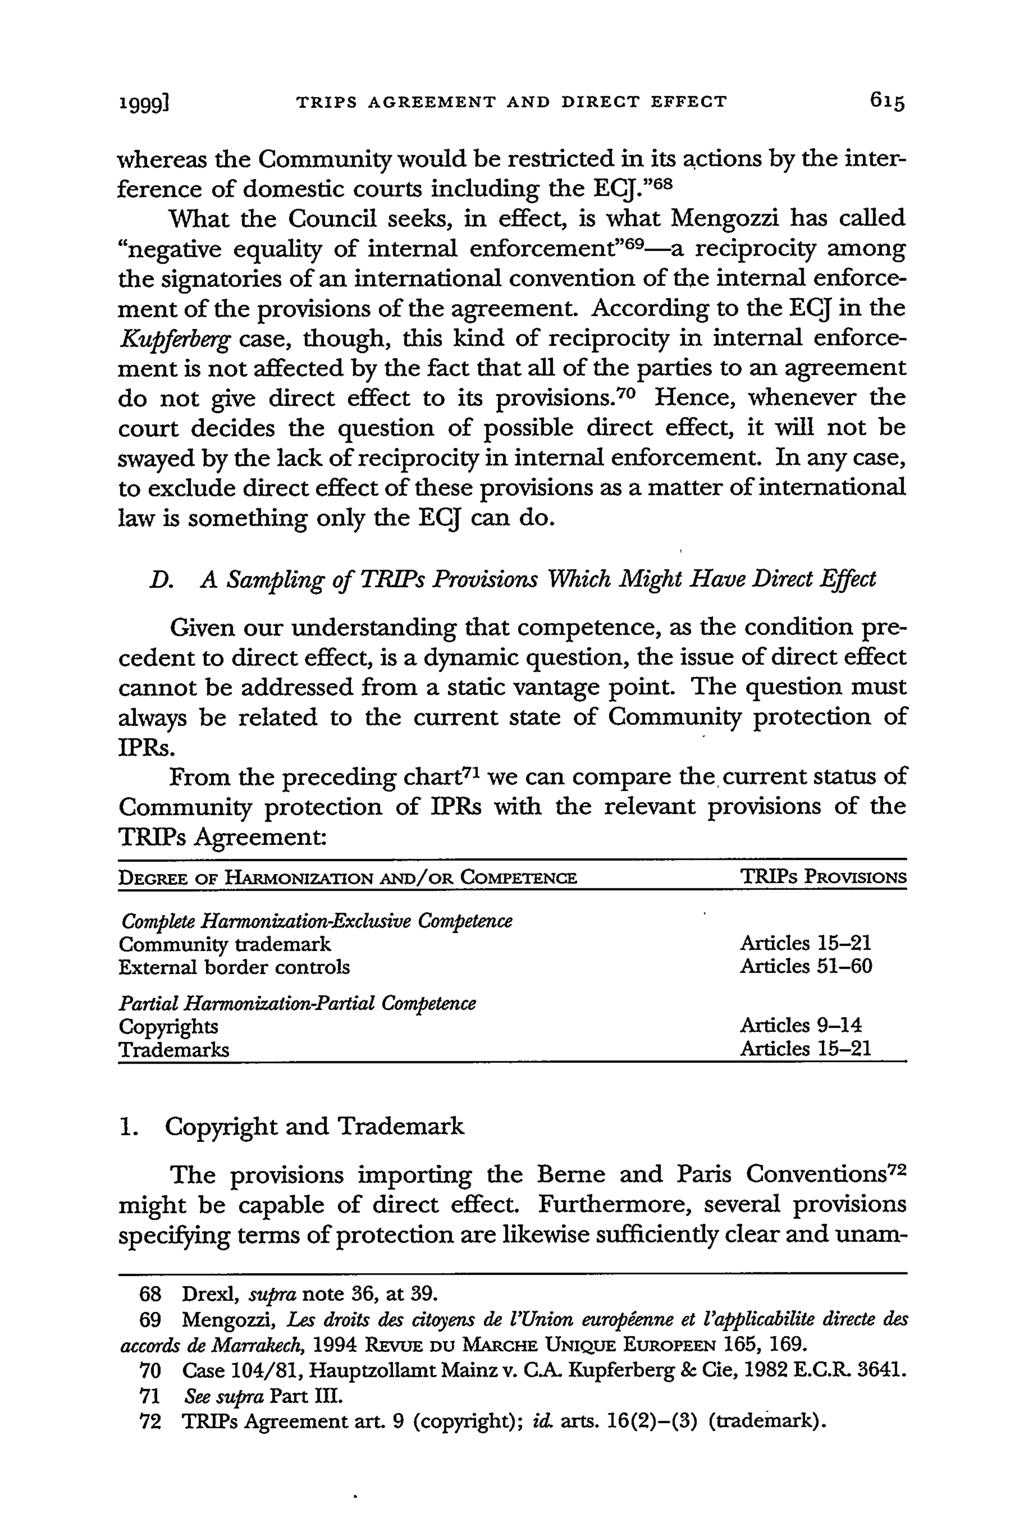 1999] TRIPS AGREEMENT AND DIRECT EFFECT whereas the Community would be restricted in its actions by the interference of domestic courts including the ECJ.